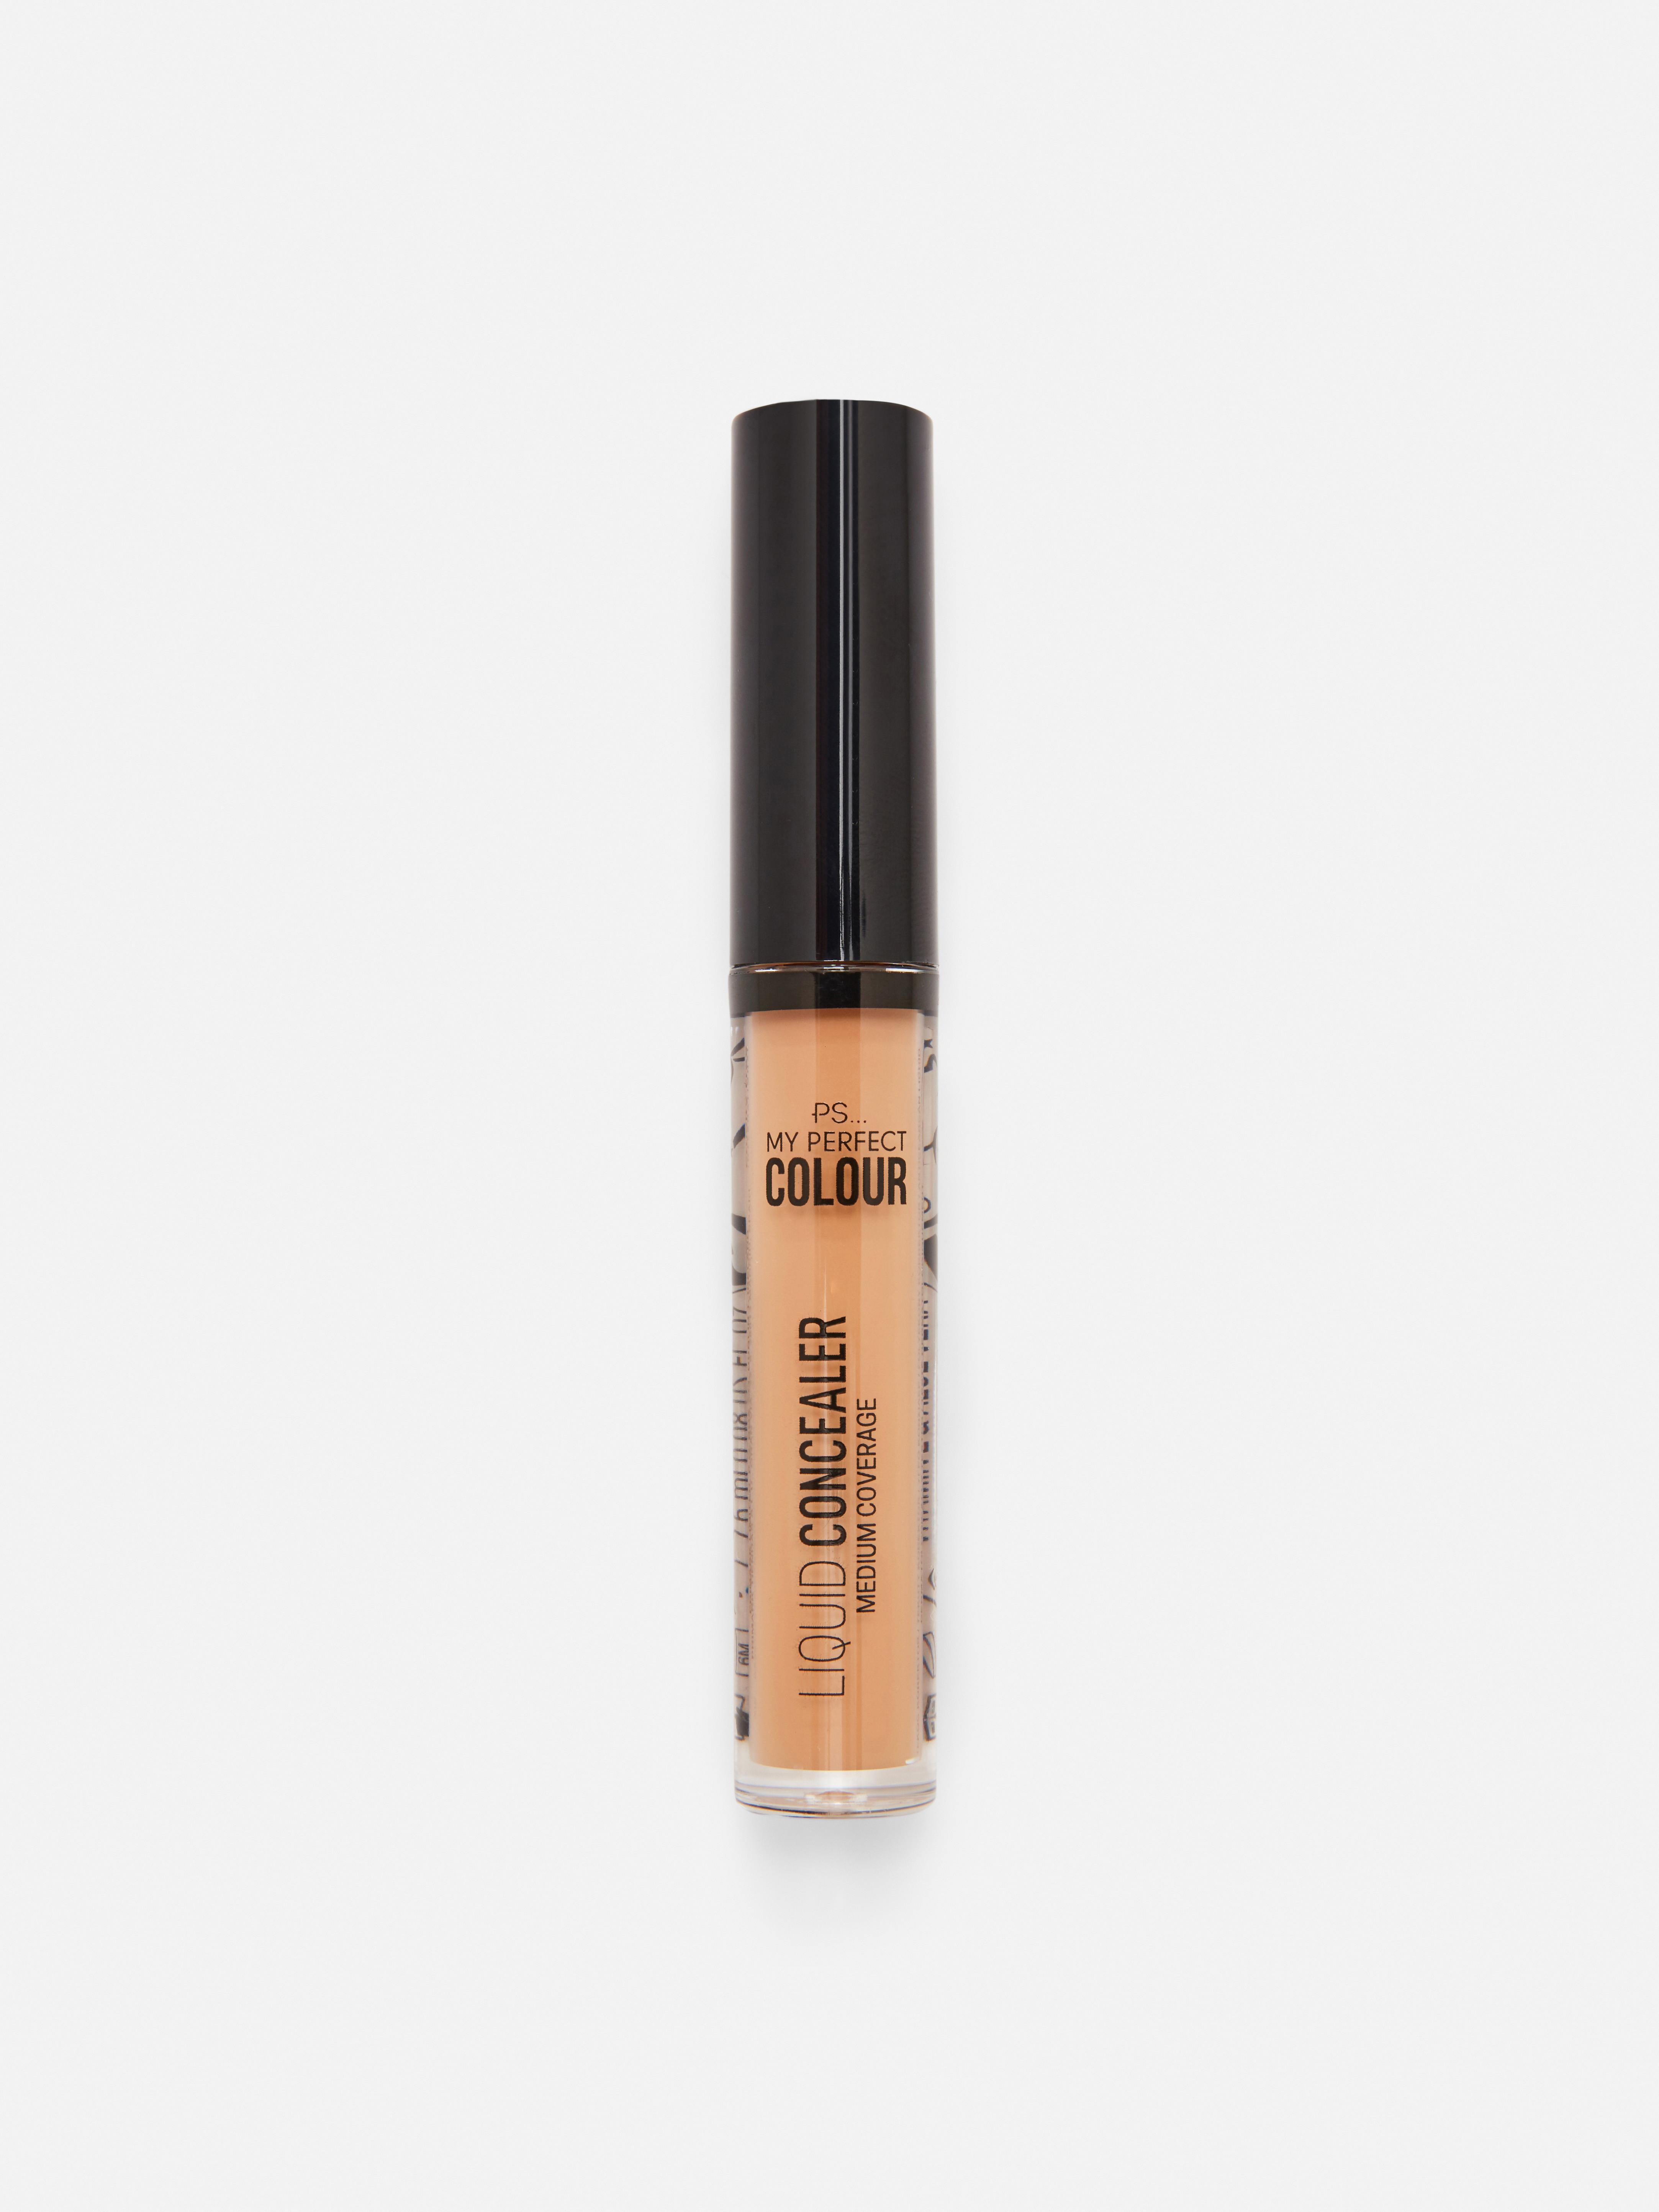 PS My Perfect Colour Concealer